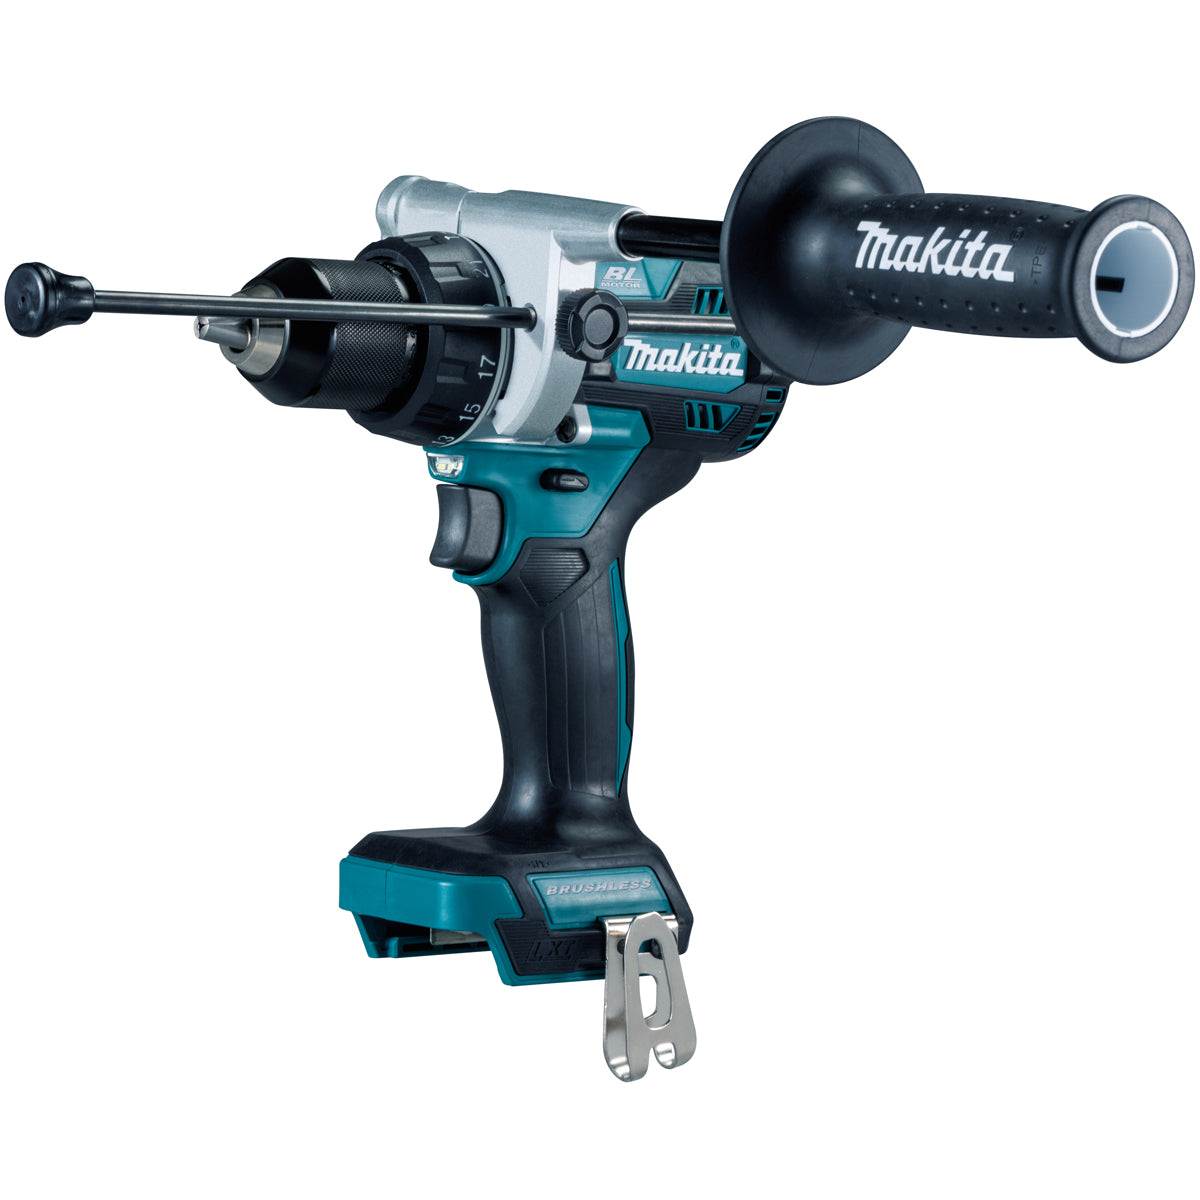 Makita DHP486Z 18V Brushless Combi Drill with 1 x 5.0Ah Battery + Charger & Case